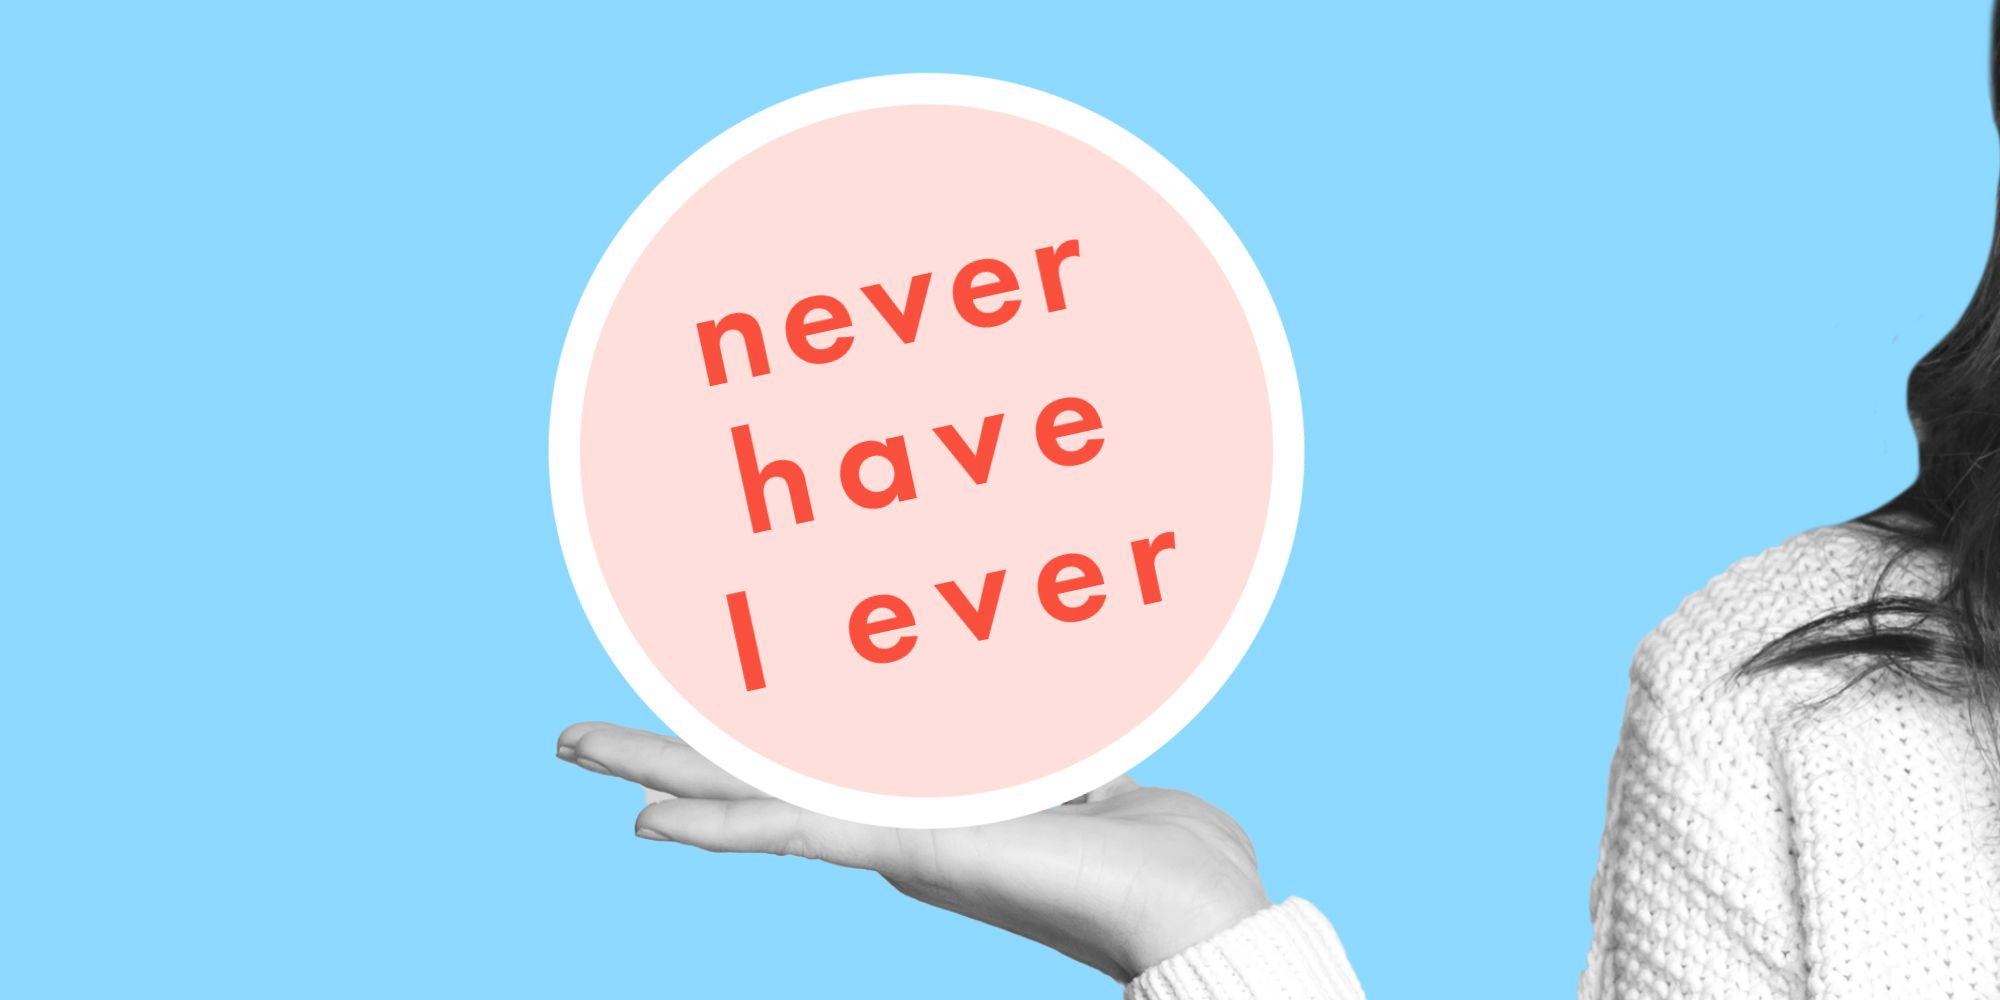 Ever i never have